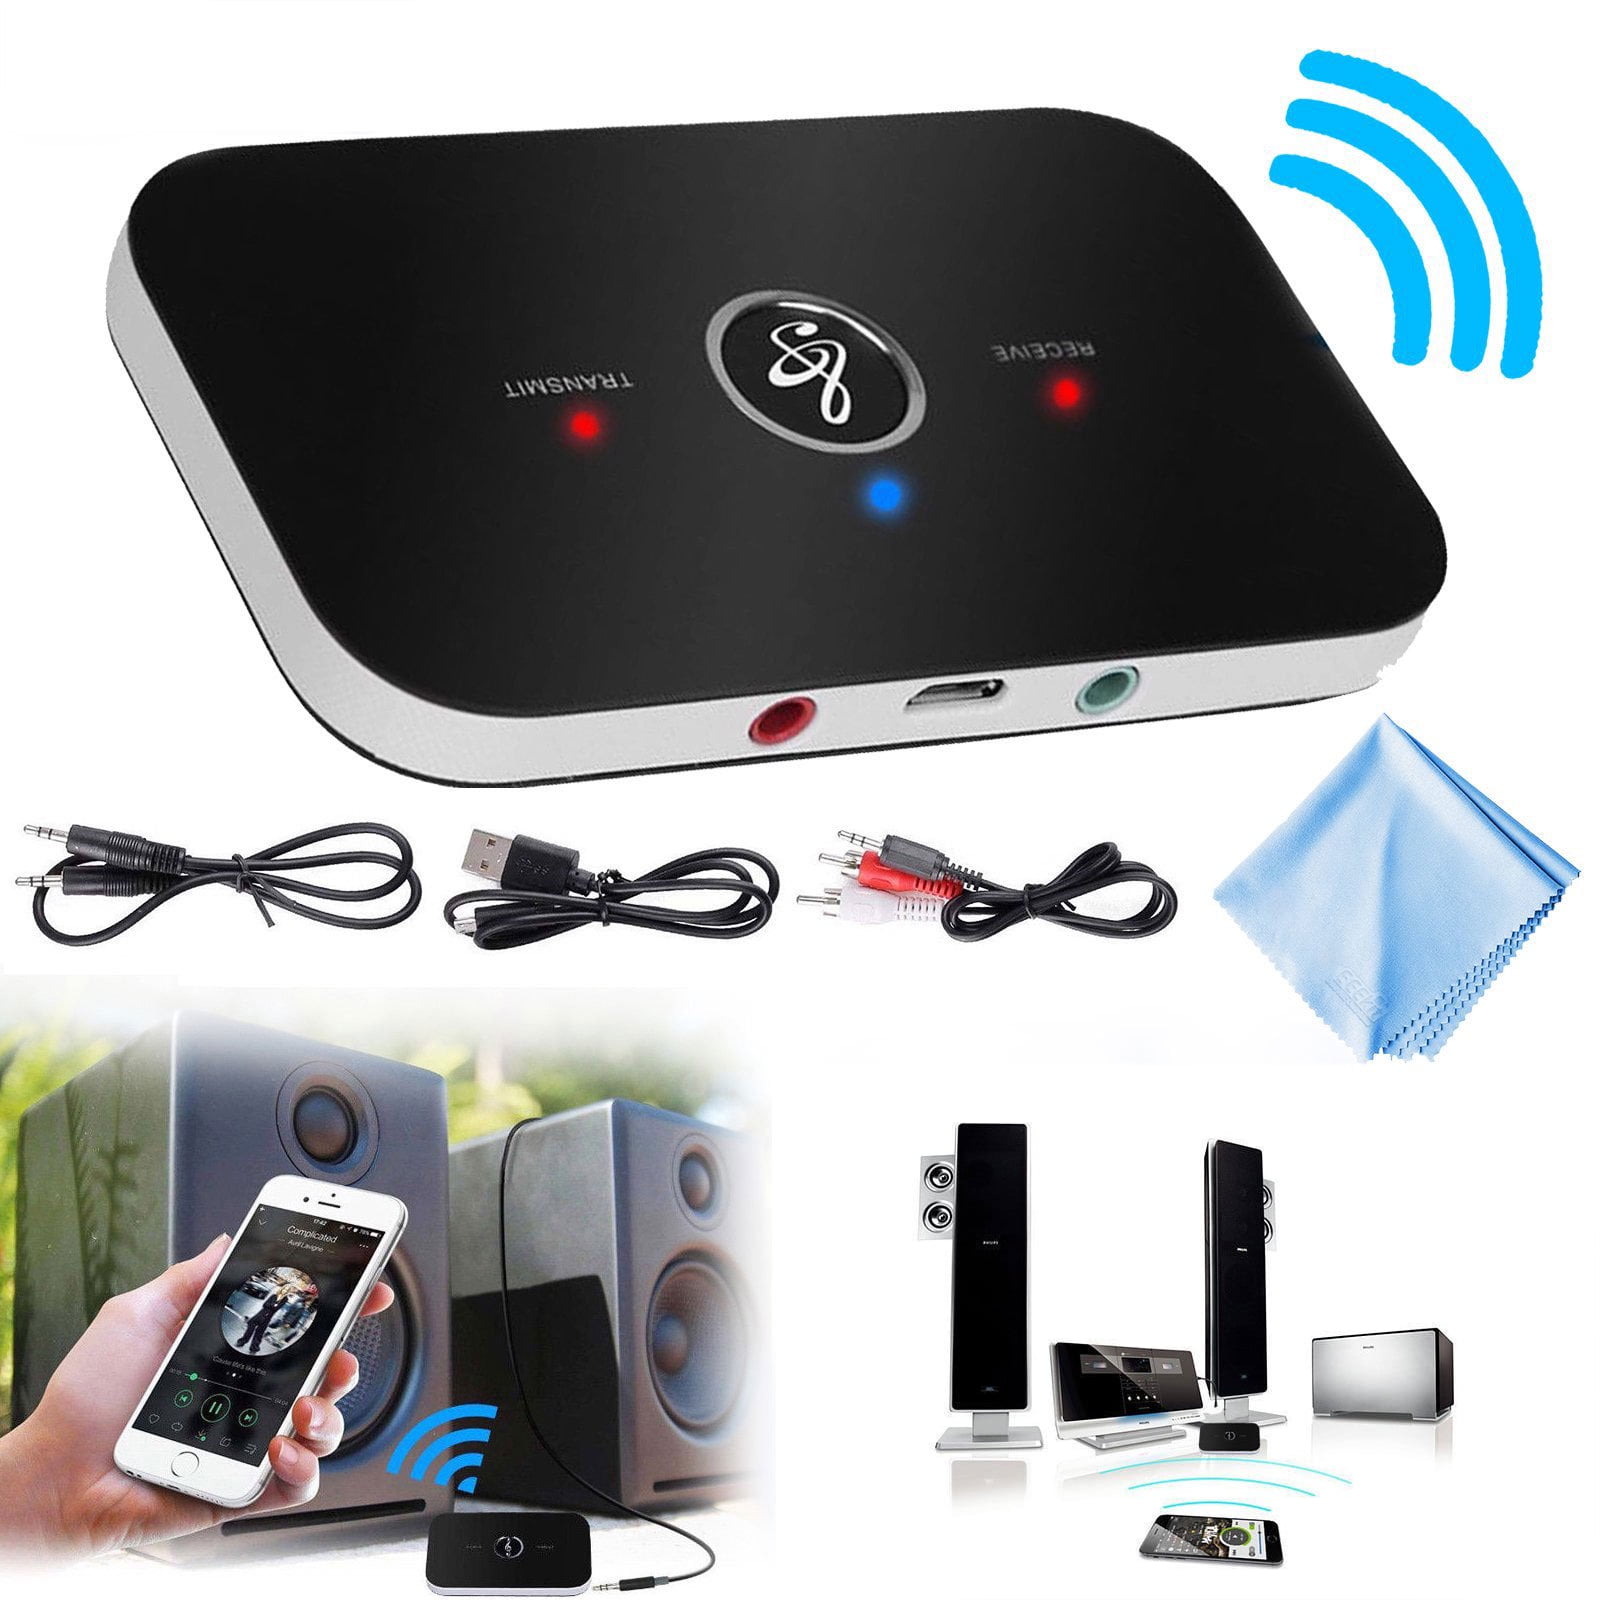 2 In 1 Bluetooth Transmitter&Receiver Wireless A2DP Home TV Stereo Audio Adapter 